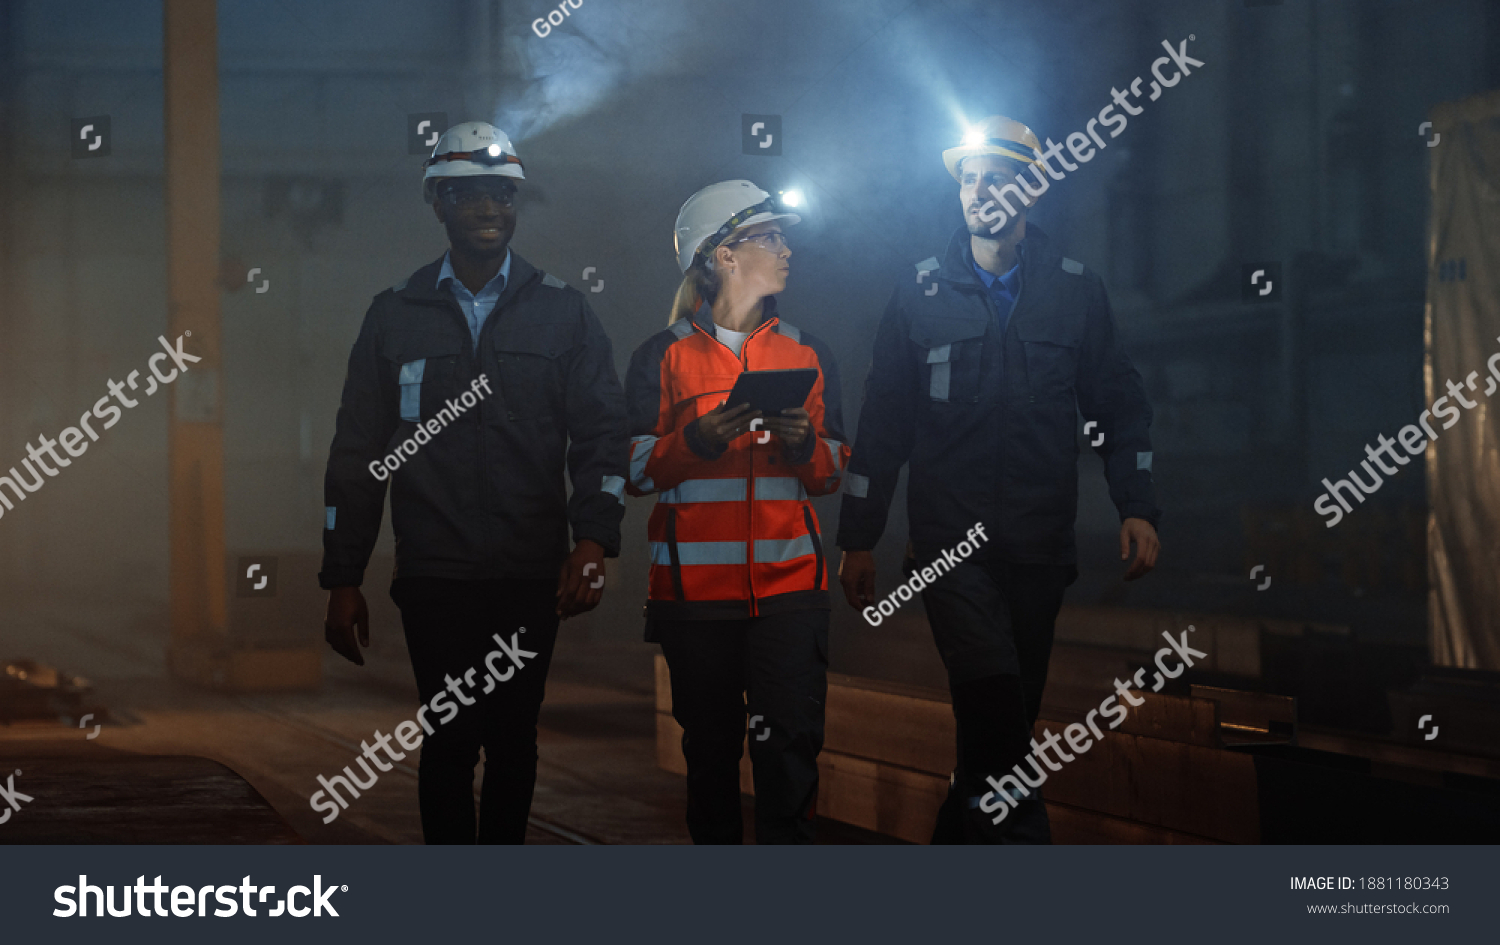 Three Diverse Multicultural Heavy Industry Engineers and Workers in Uniform Walk in Dark Steel Factory Using Flashlights on Their Hard Hats. Female Industrial Contractor is Using a Tablet Computer. #1881180343